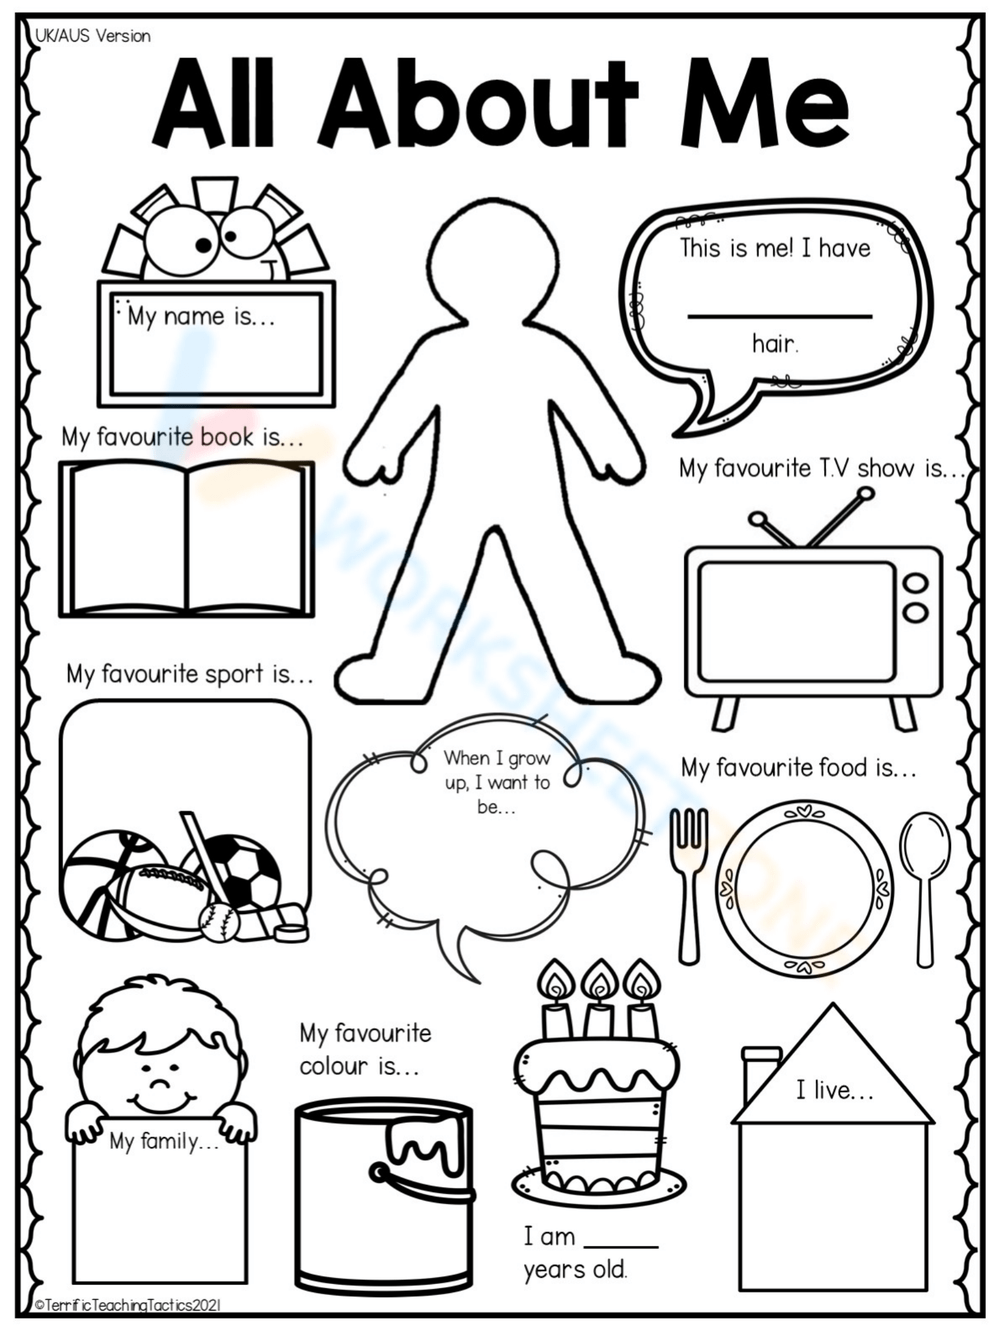 4 Free Math Worksheets First Grade 1 Addition Number Bonds Sum 9 spring  activities for childr...